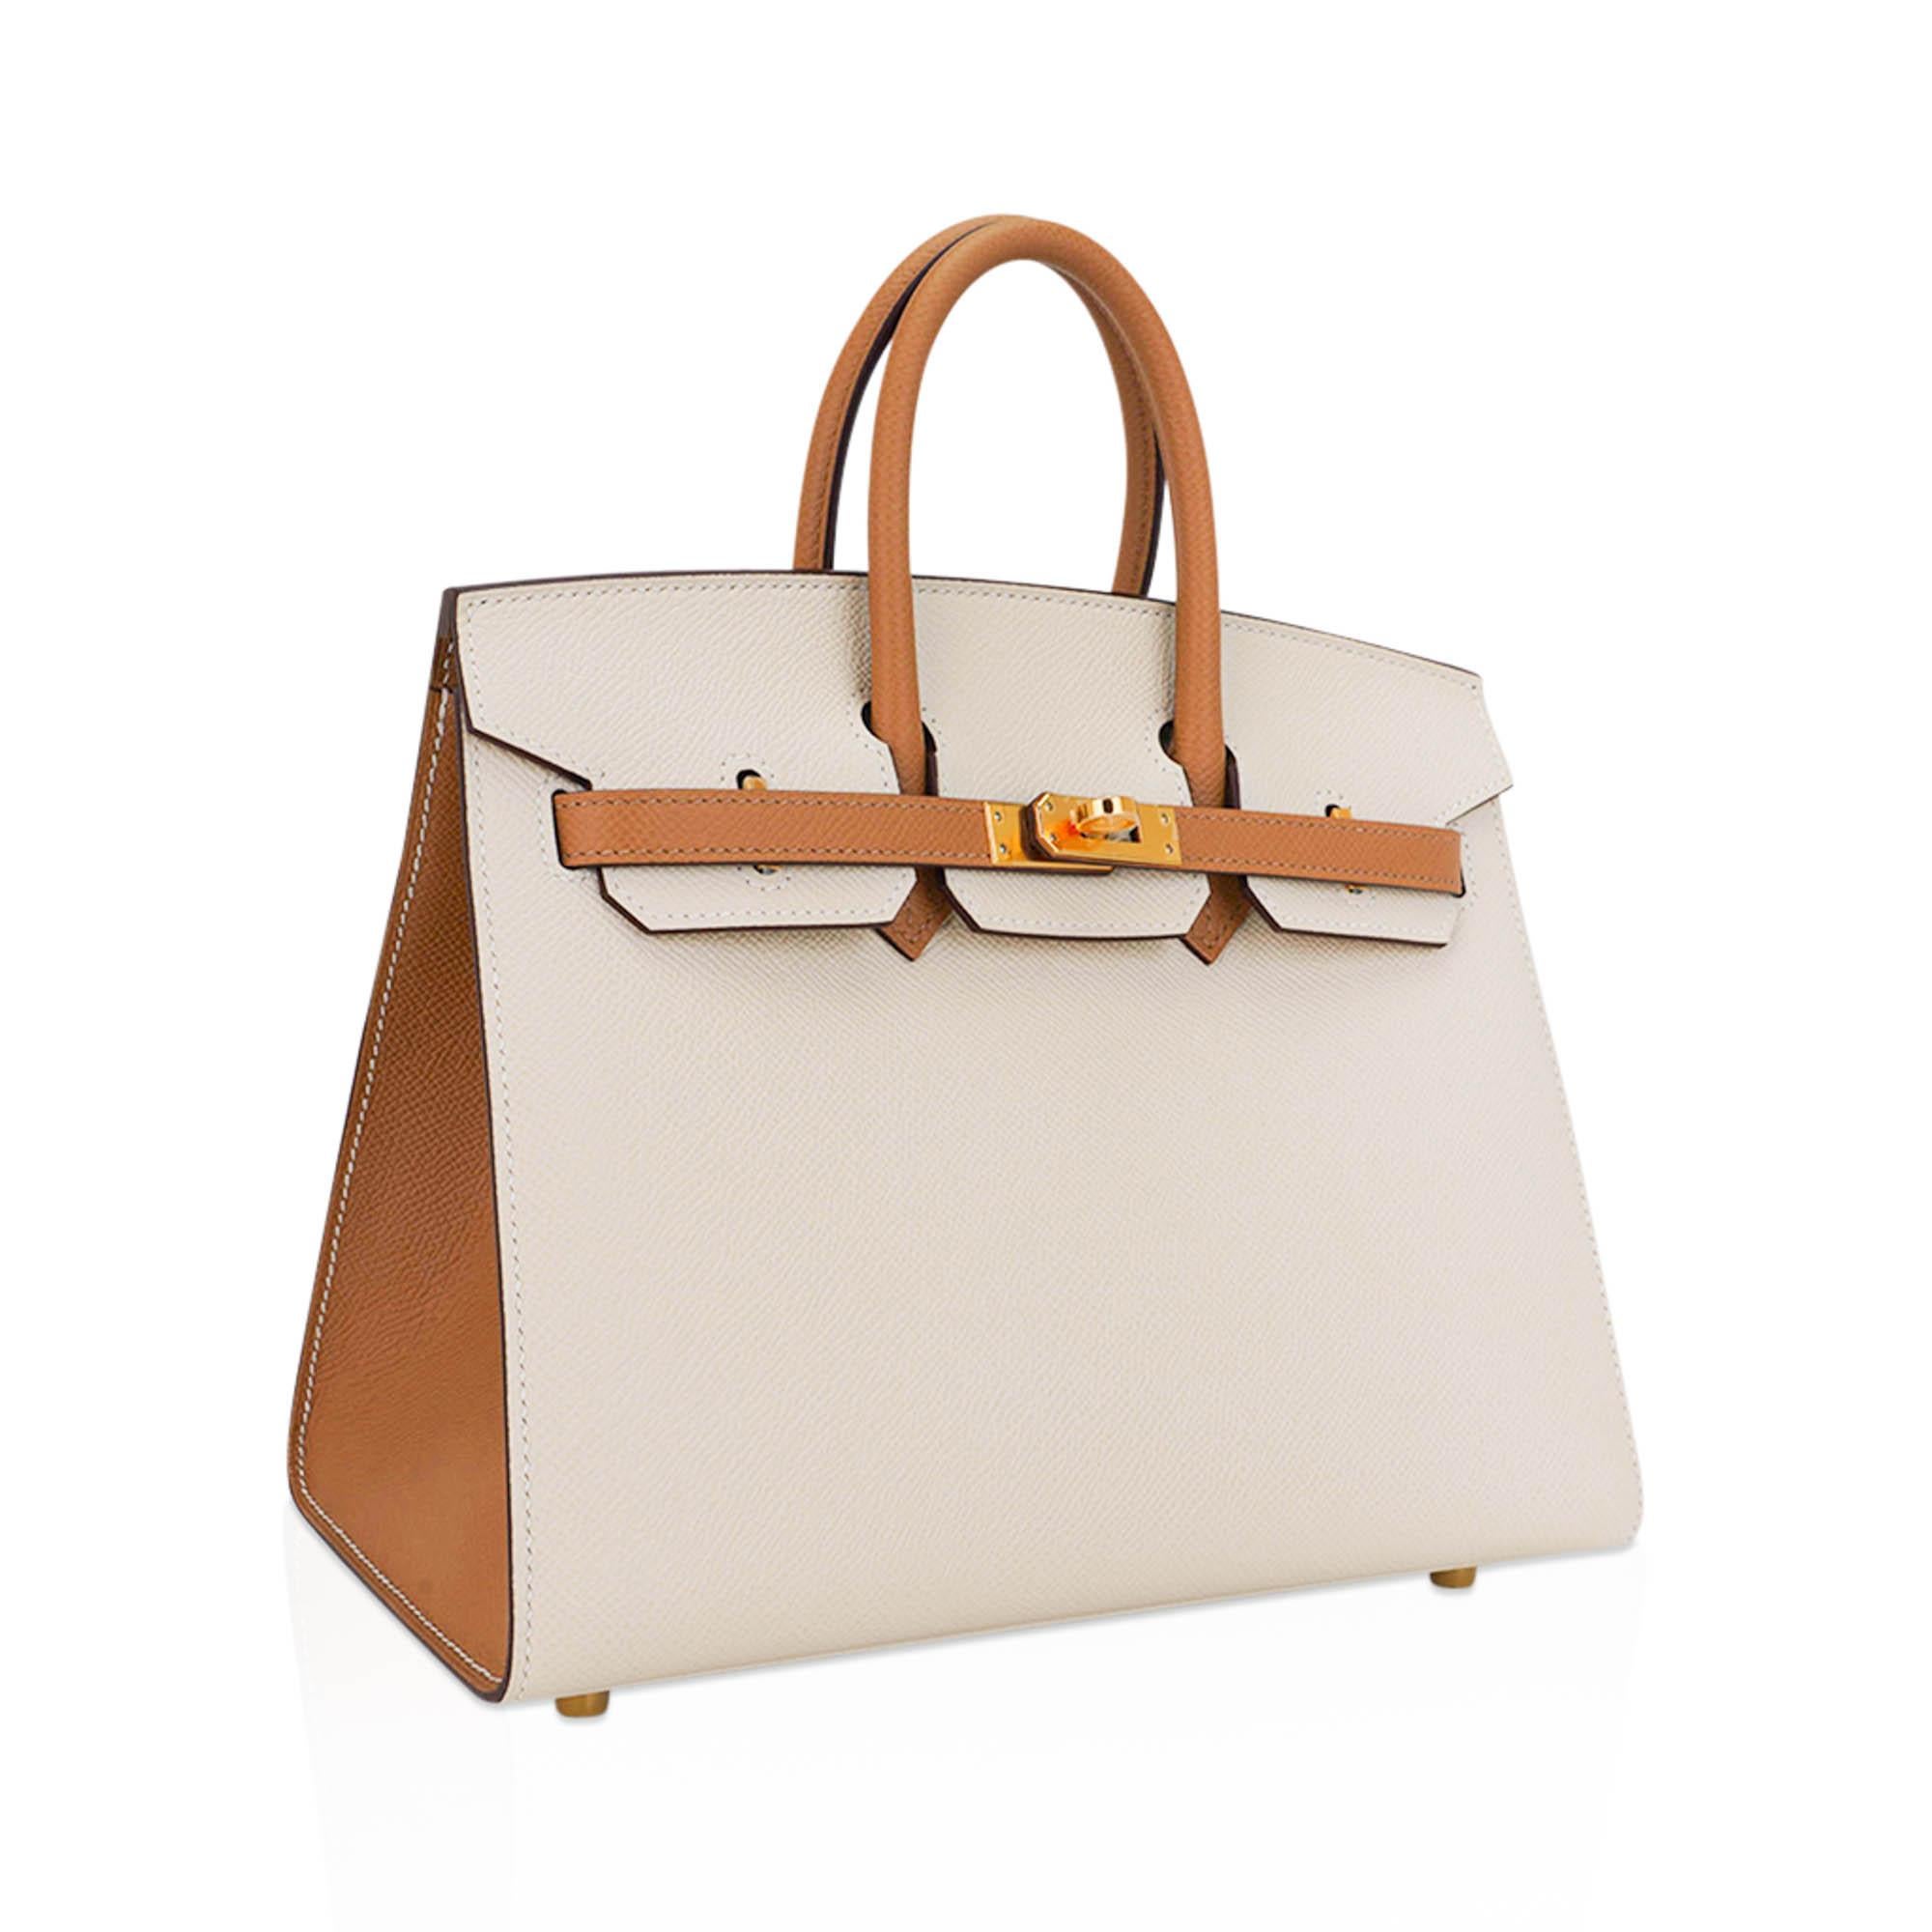 Mightychic offers an Hermes Birkin Sellier 25 HSS bag featured in Craie and Sesame.
This special order Hermes Birkin is a perfect compliment of neutral colours for year round wear.
Lush with Gold hardware.
This exquisite bag is modern and